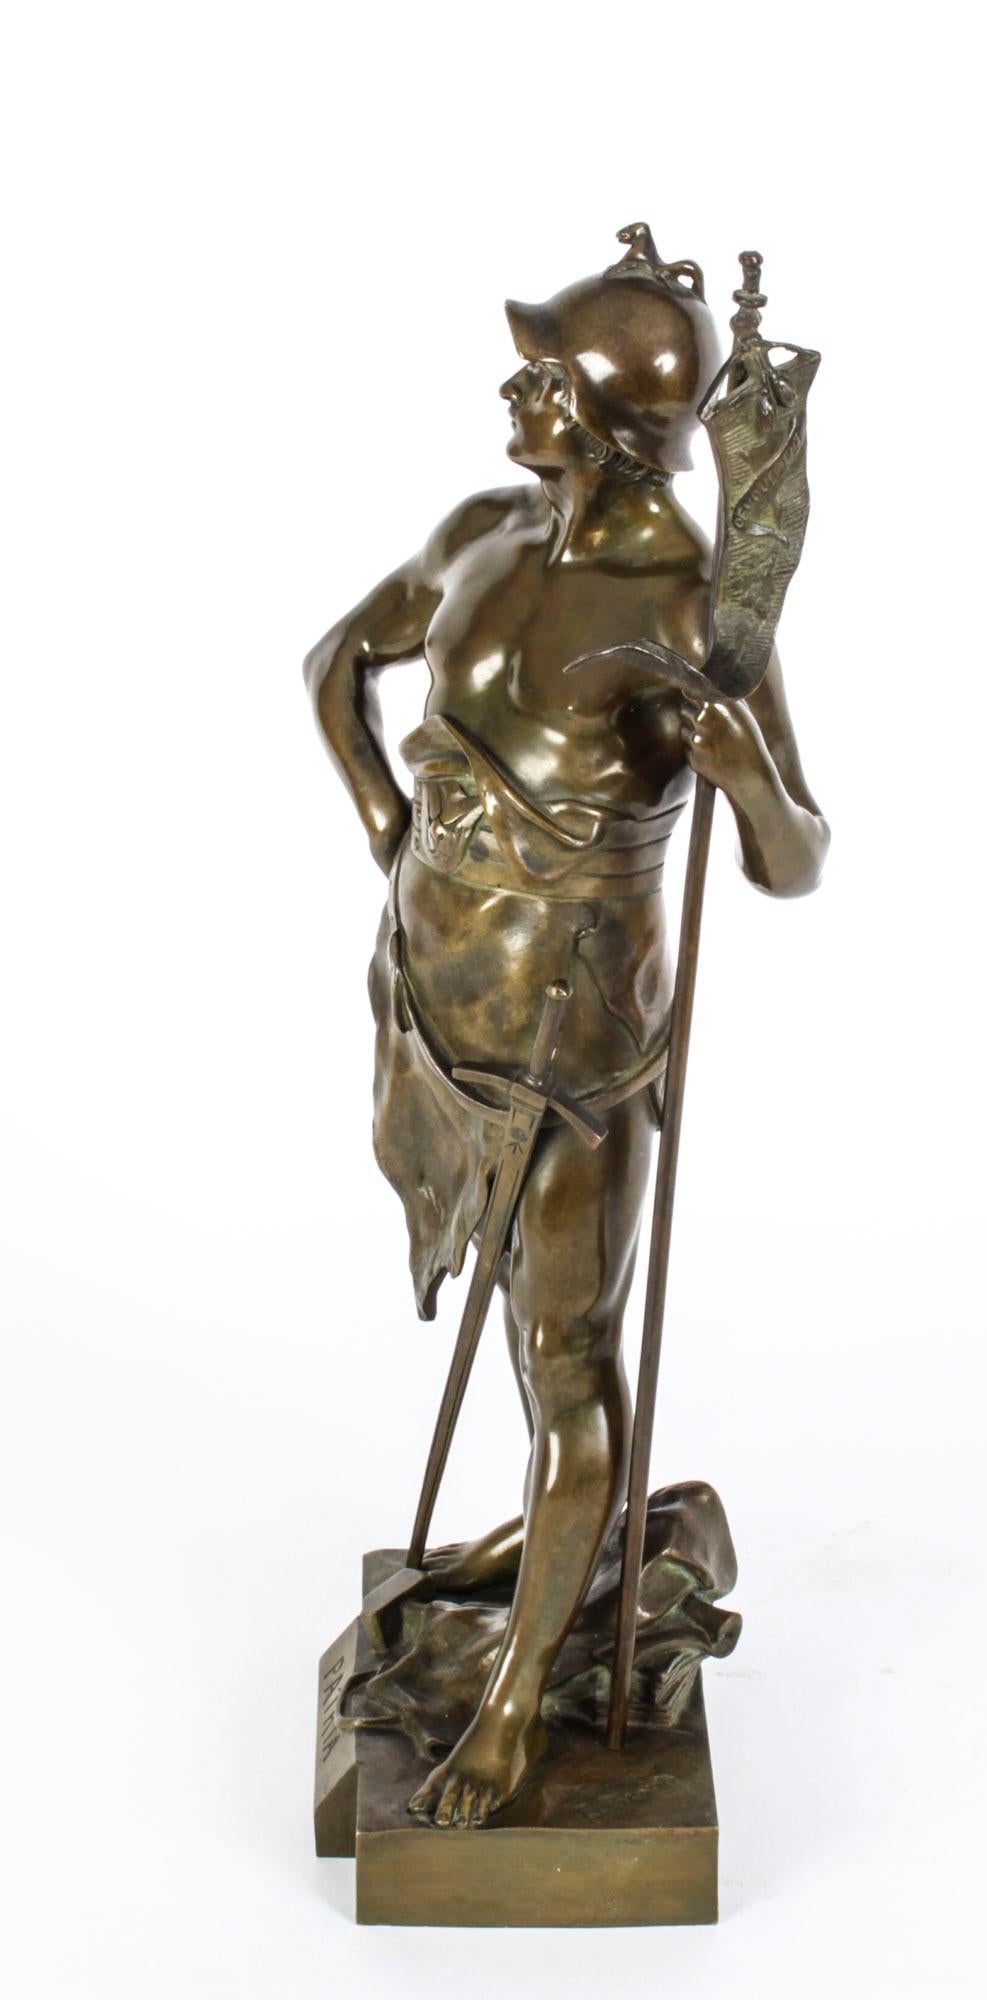 This is a large French bronze sculpture of a mythological warrior entitled 'Patria' inscribed and signed on the base Emile Louis Picault, Circa 1870 in date.
 
The figure has a light brown patina and is armed with a large sword, wearing a helmet